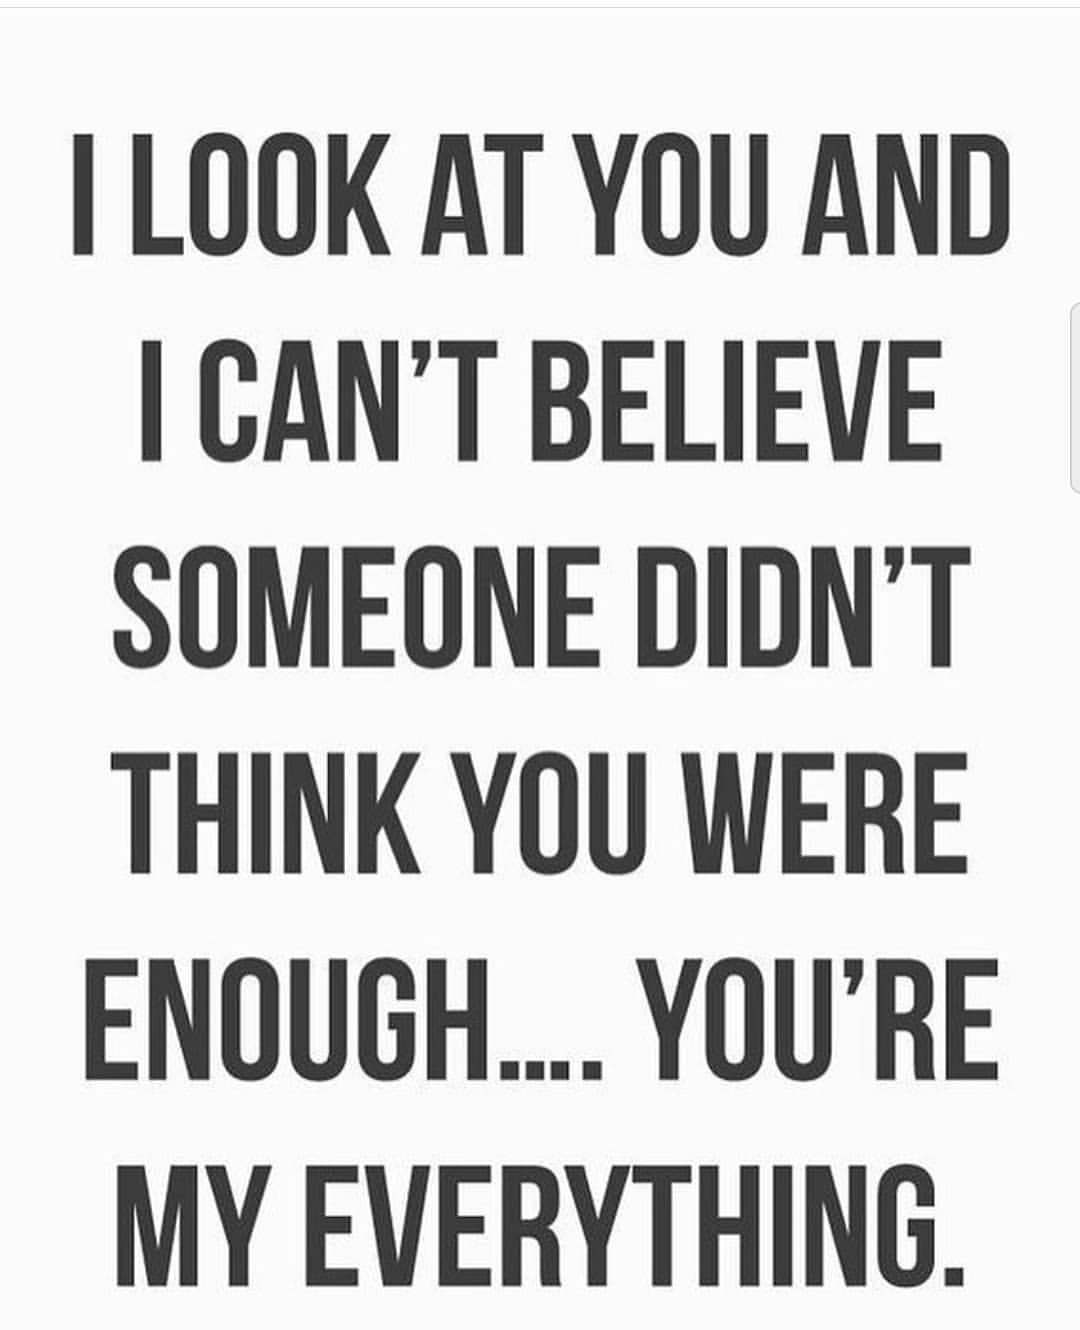 I look at you and I can't believe someone didn't think you were enough ...